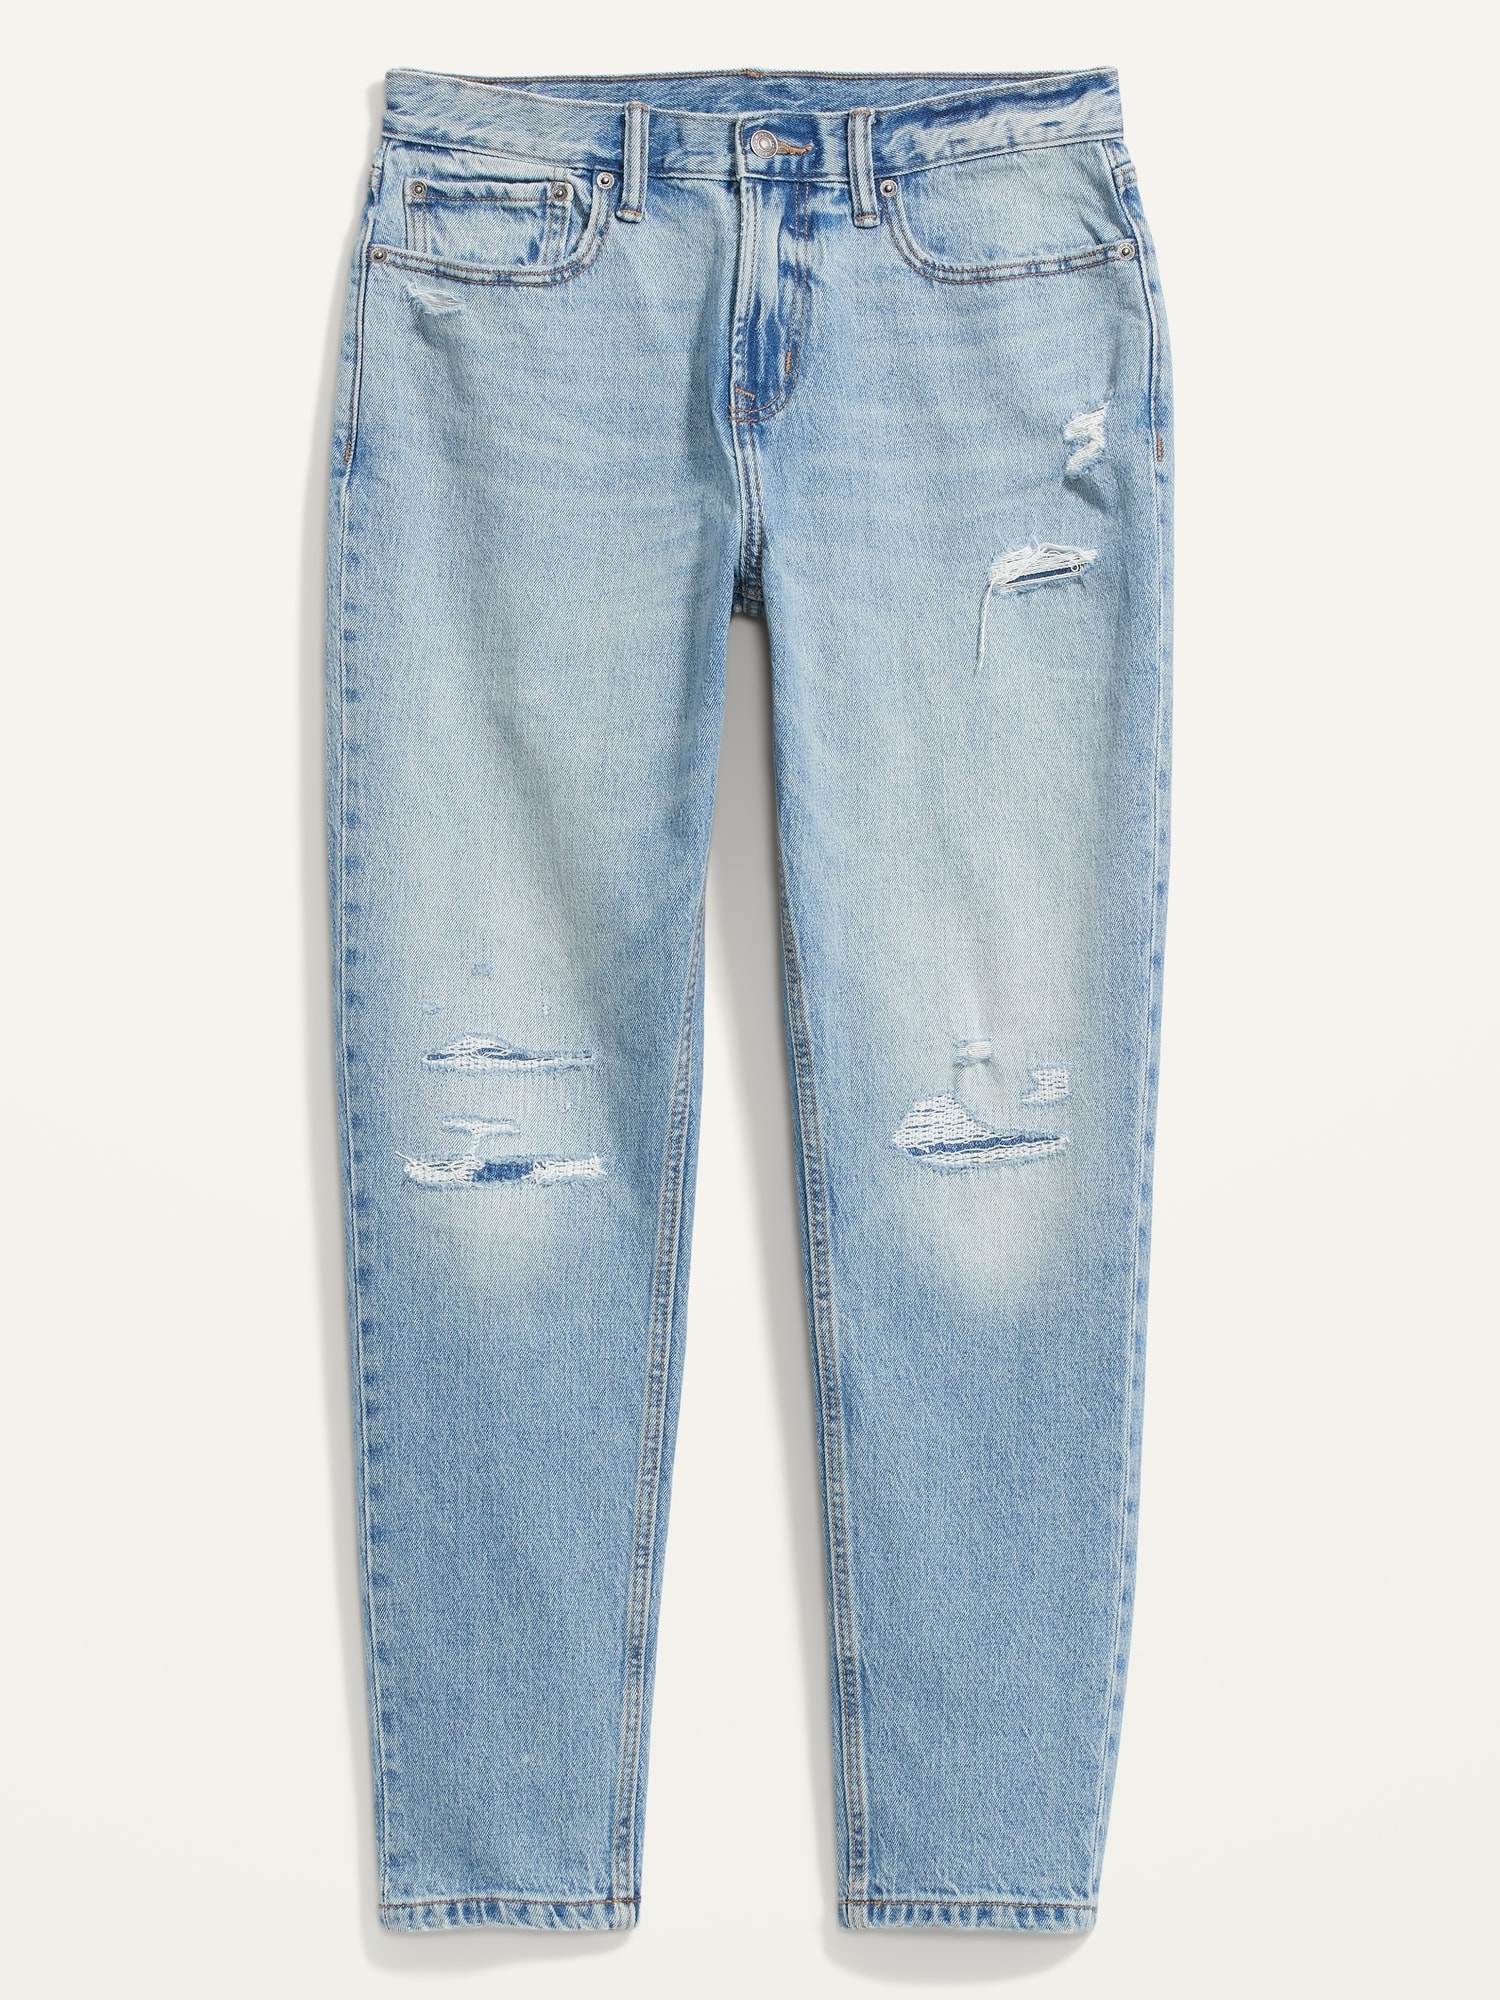 H&M Divided Light Wash Jeans Women's Size 10